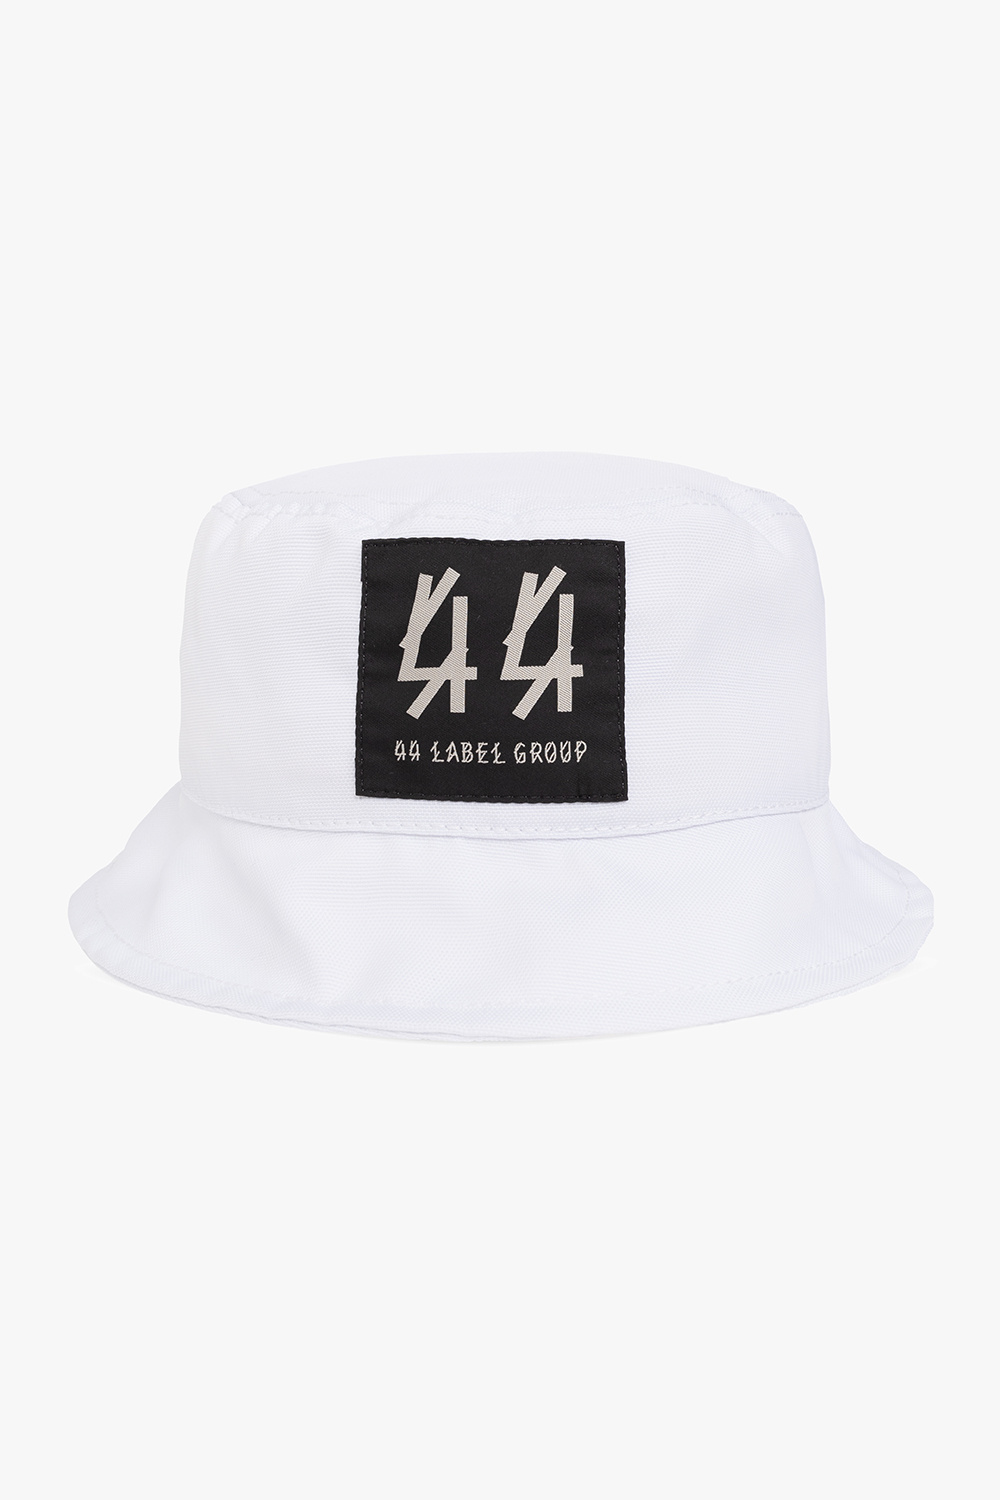 44 Label Group hat green 39-5 Shirts